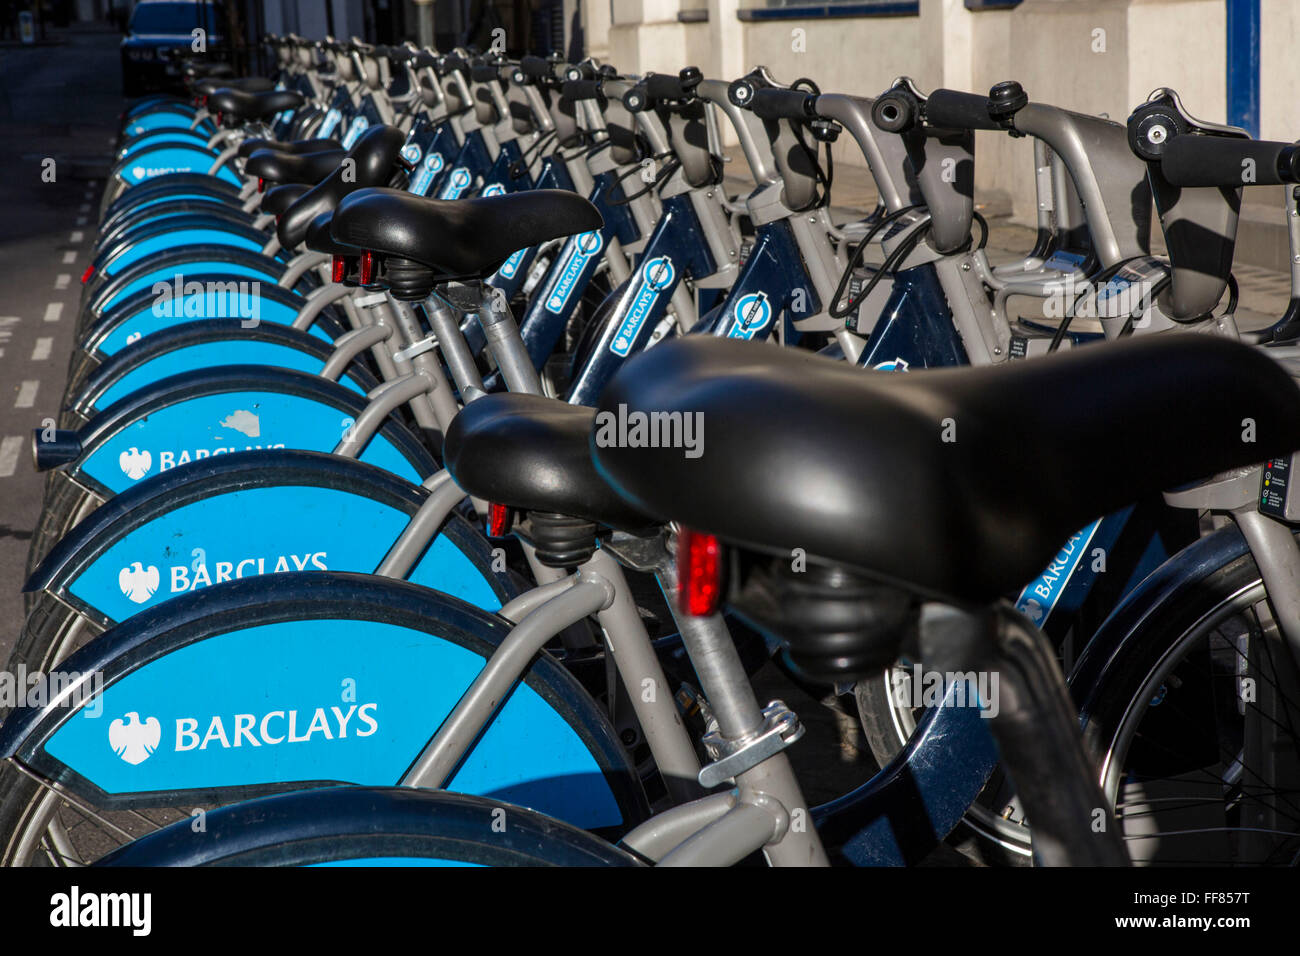 Bikes lined up in the Barclays cycle hire stand, Liverpool Street, London, United Kingdom. These bikes, often called Boris Bikes, after the mayor part of the Transport for London network. Stock Photo